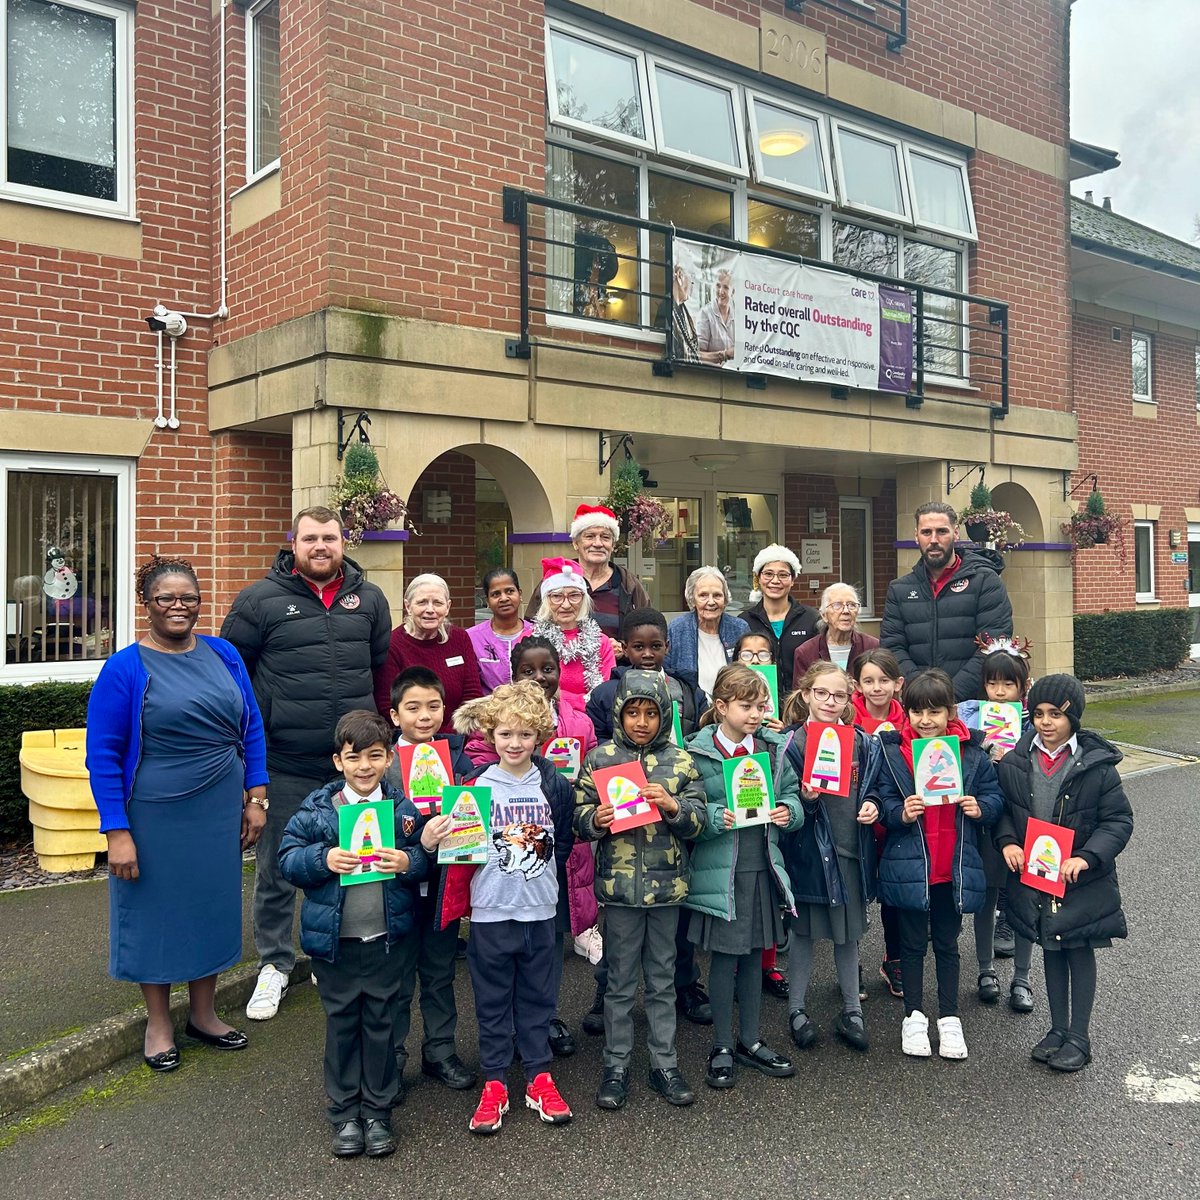 🎄Maidenhead United in the Community visited Clara Court Care Home in Maidenhead earlier today to sing Christmas carols and deliver cards to the residents. This is all part of our Social Action Project, working to tackle loneliness in our community.